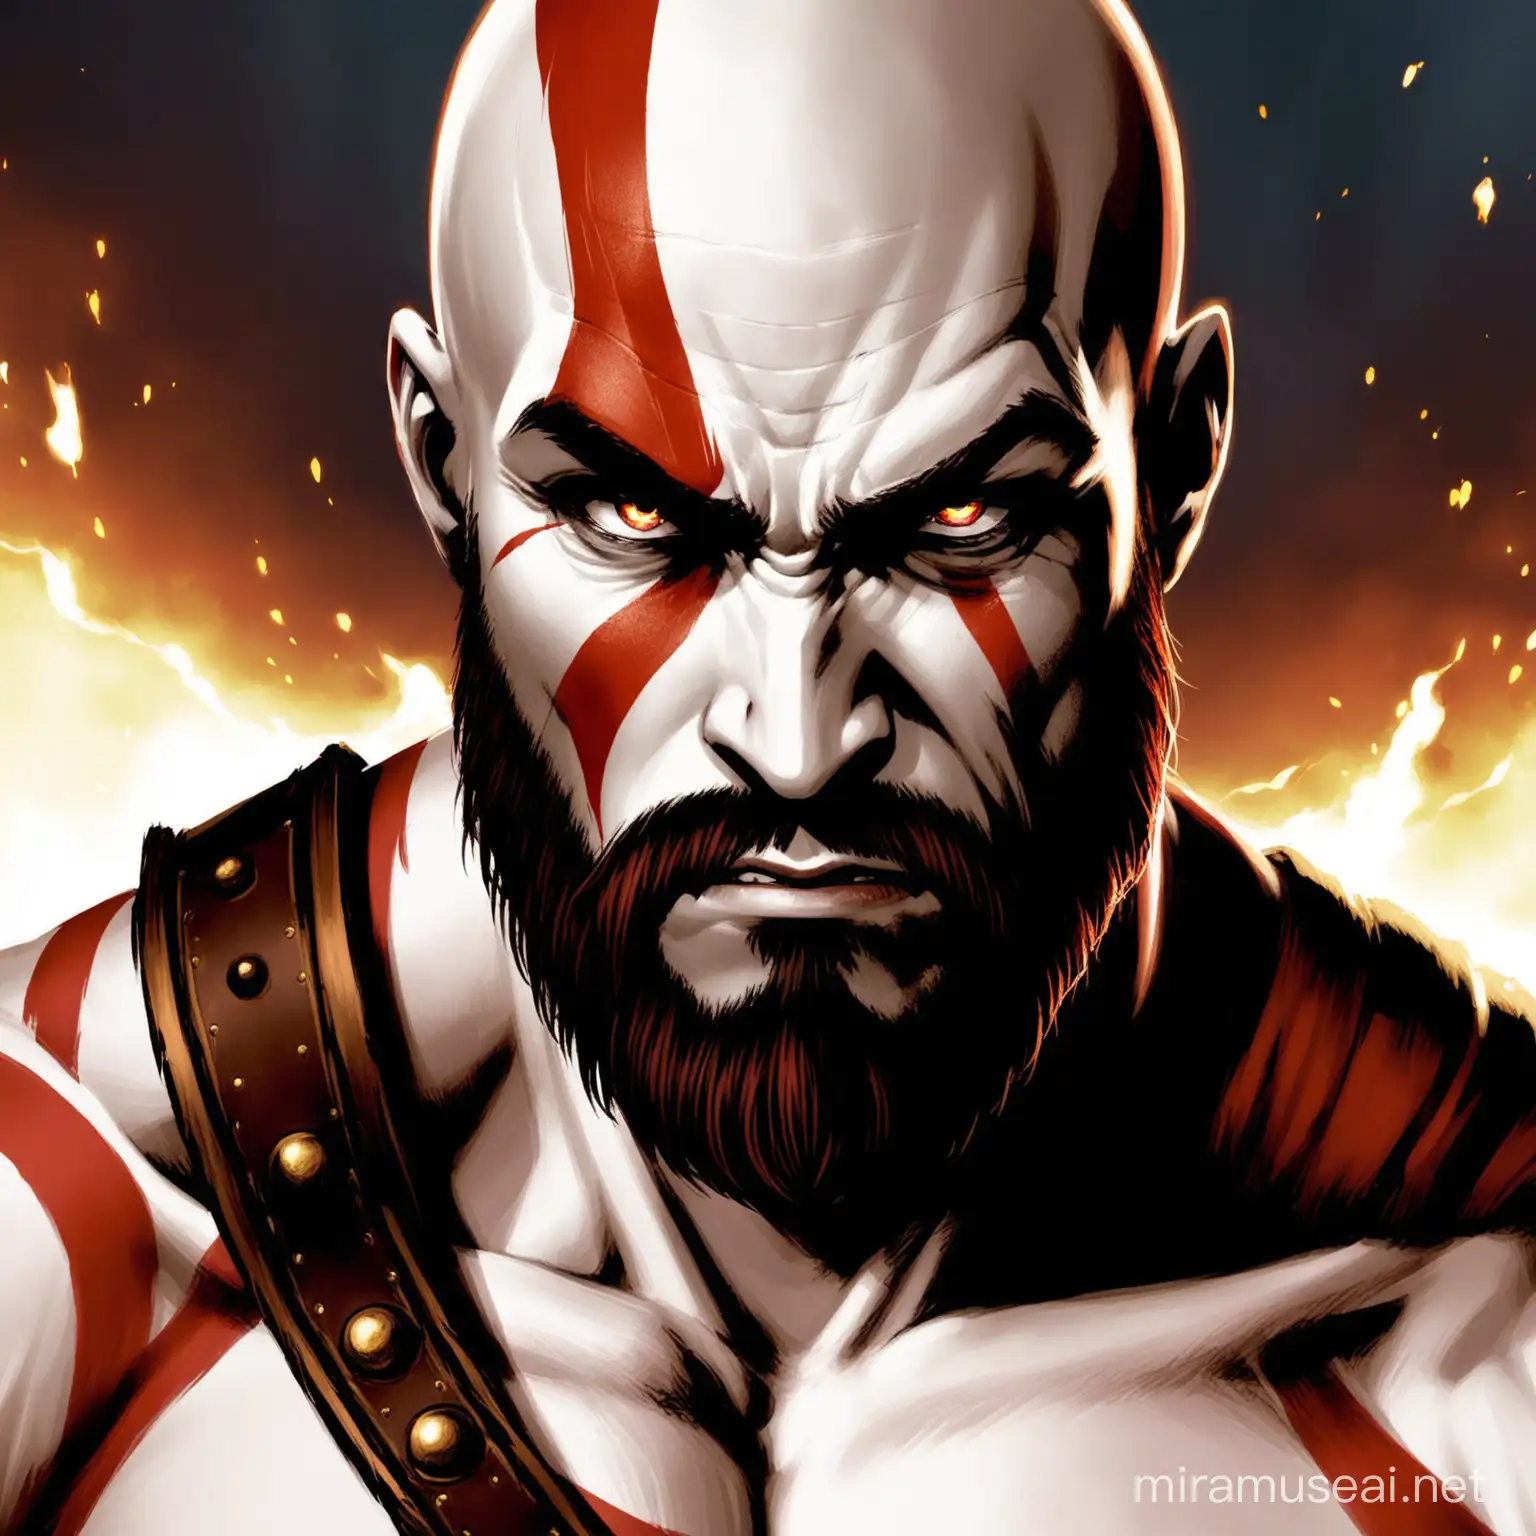 A frontal picture of Kratos from God of War 2005 looking at the camera